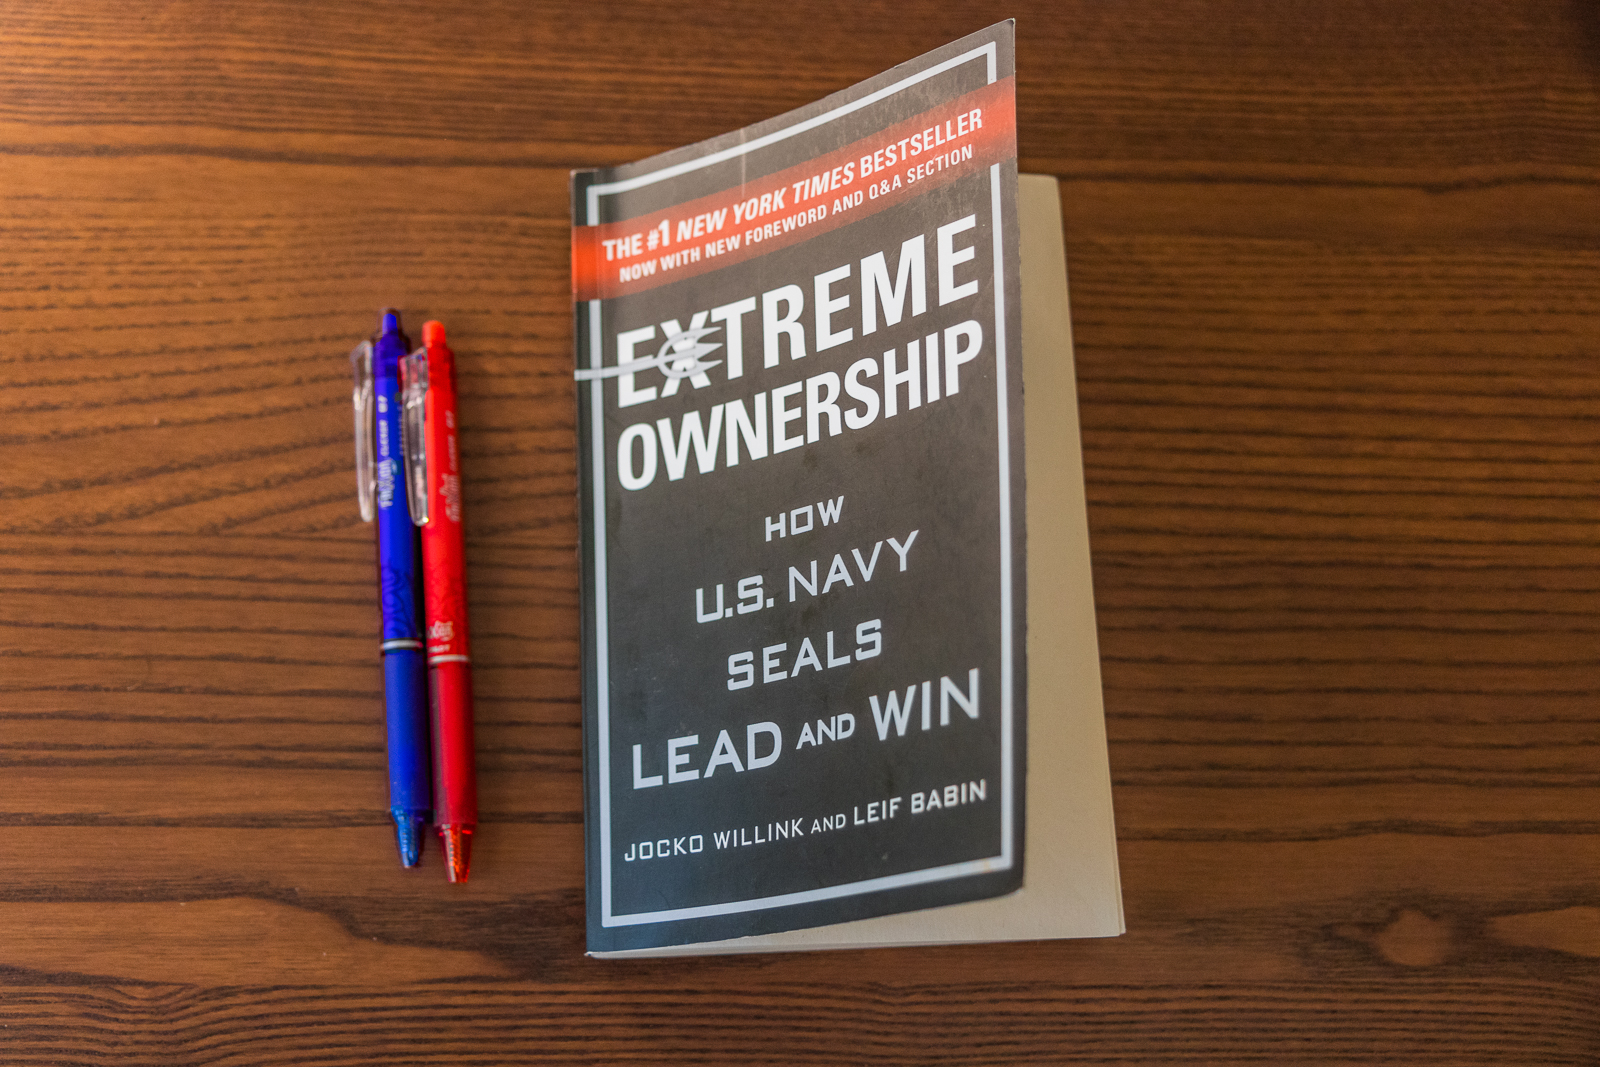 extreme-ownership-book